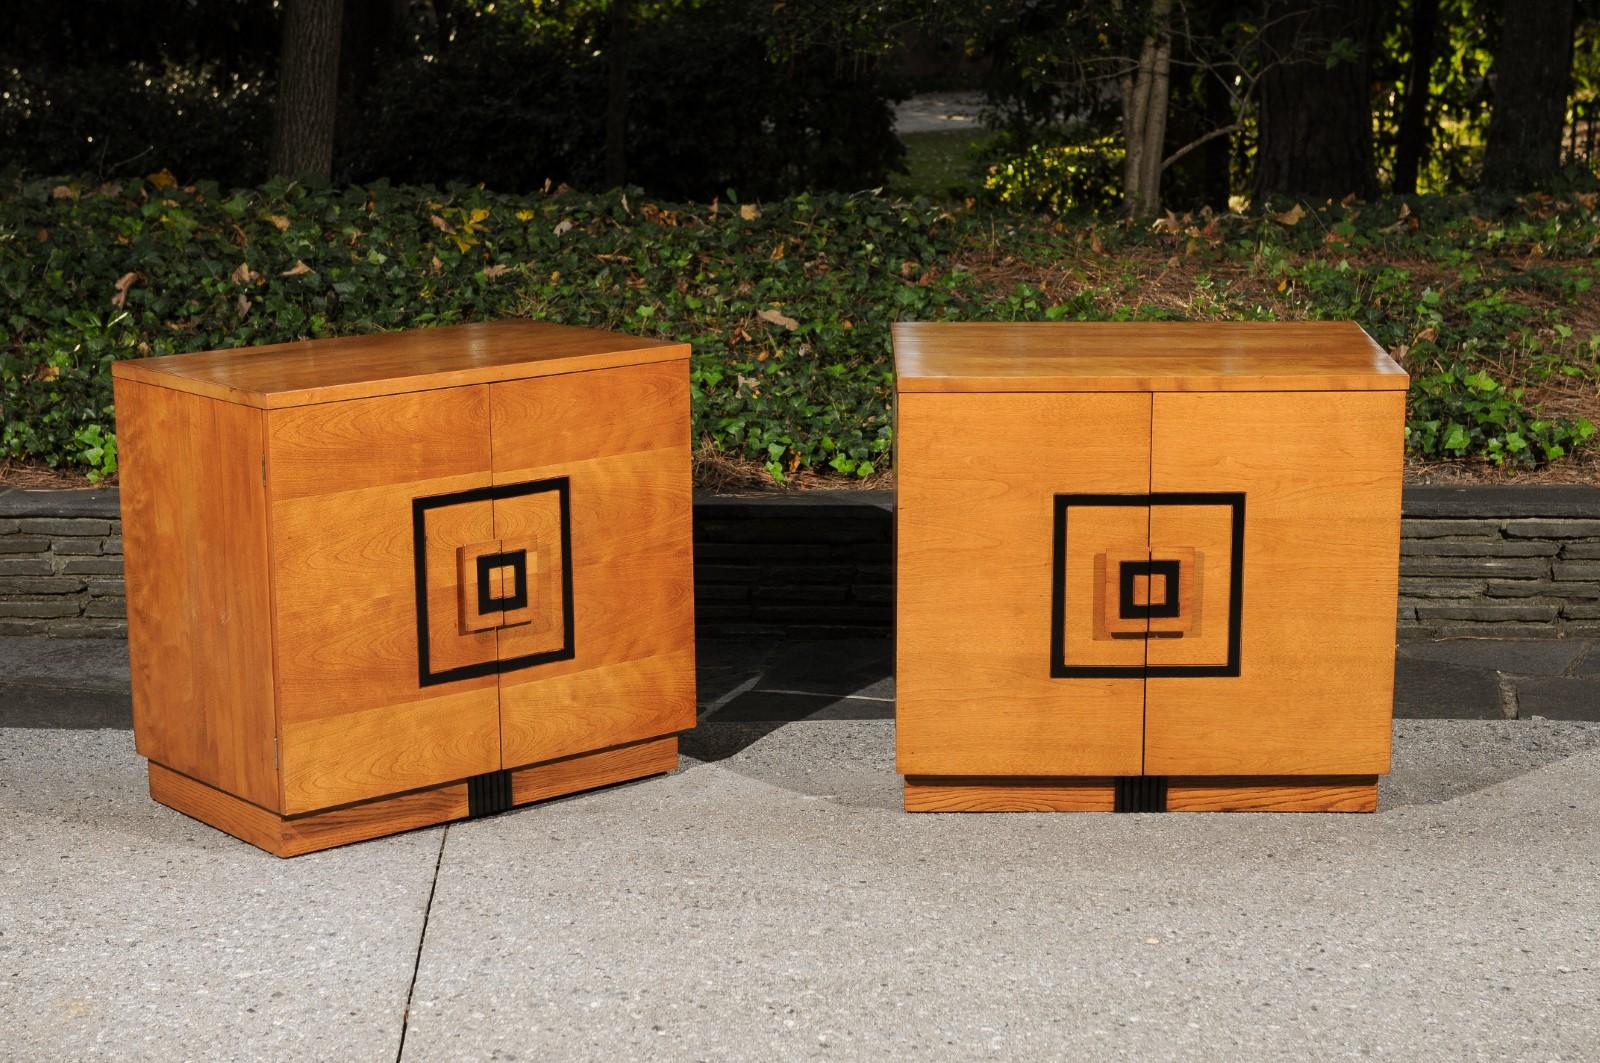 These magnificent commodes are shipped as professionally photographed and described in the listing narrative: Meticulously professionally restored and completely installation ready.

A stunning pair of Art Deco cabinets by John Stuart, circa 1940.